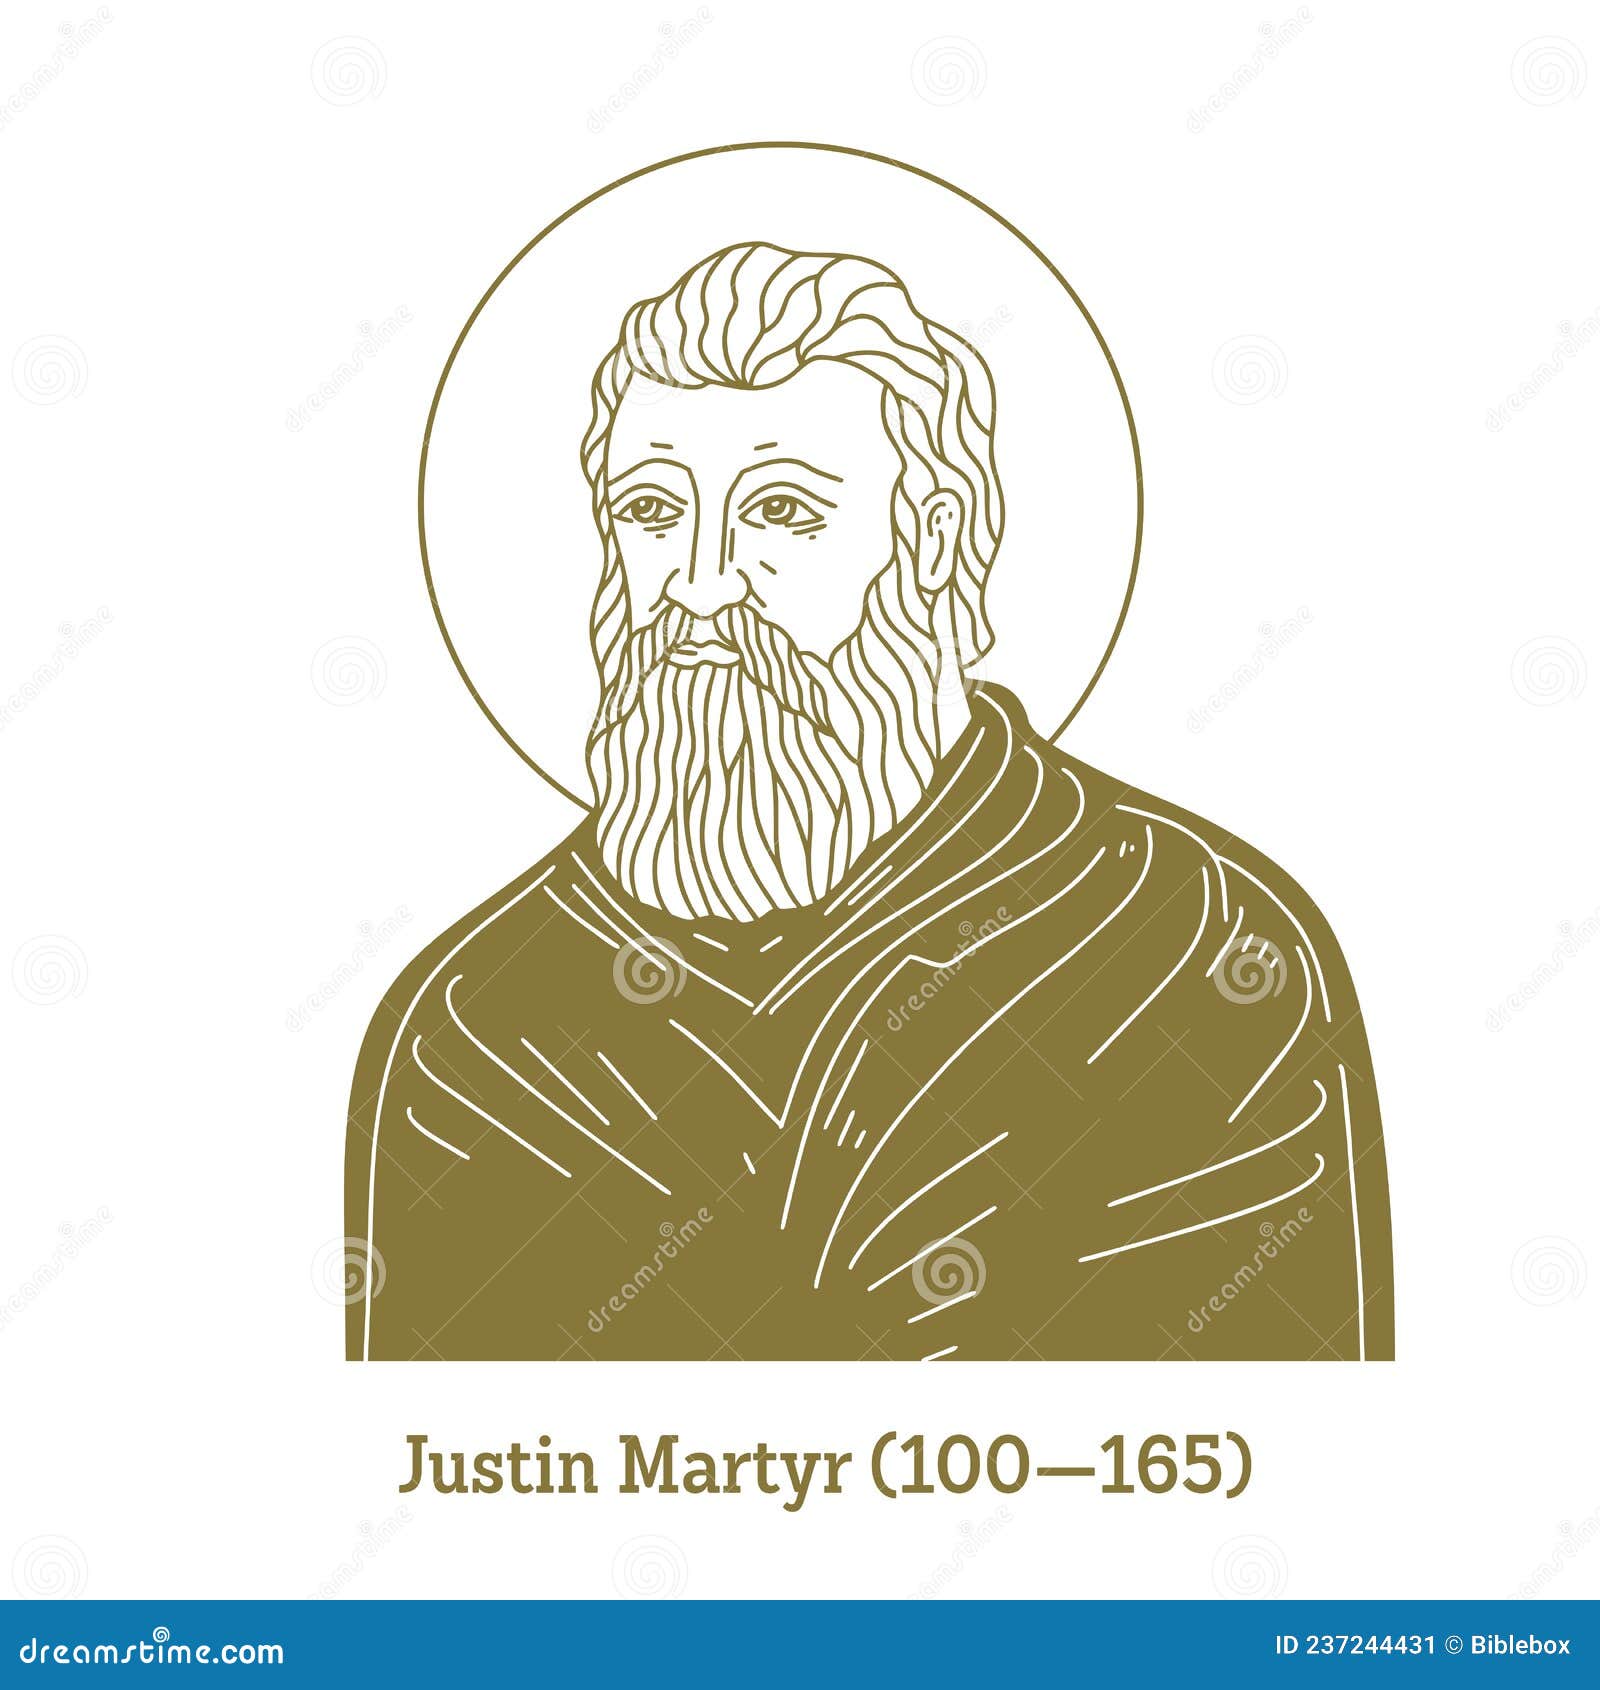 justin martyr 100-165 was an early christian apologist and philosopher